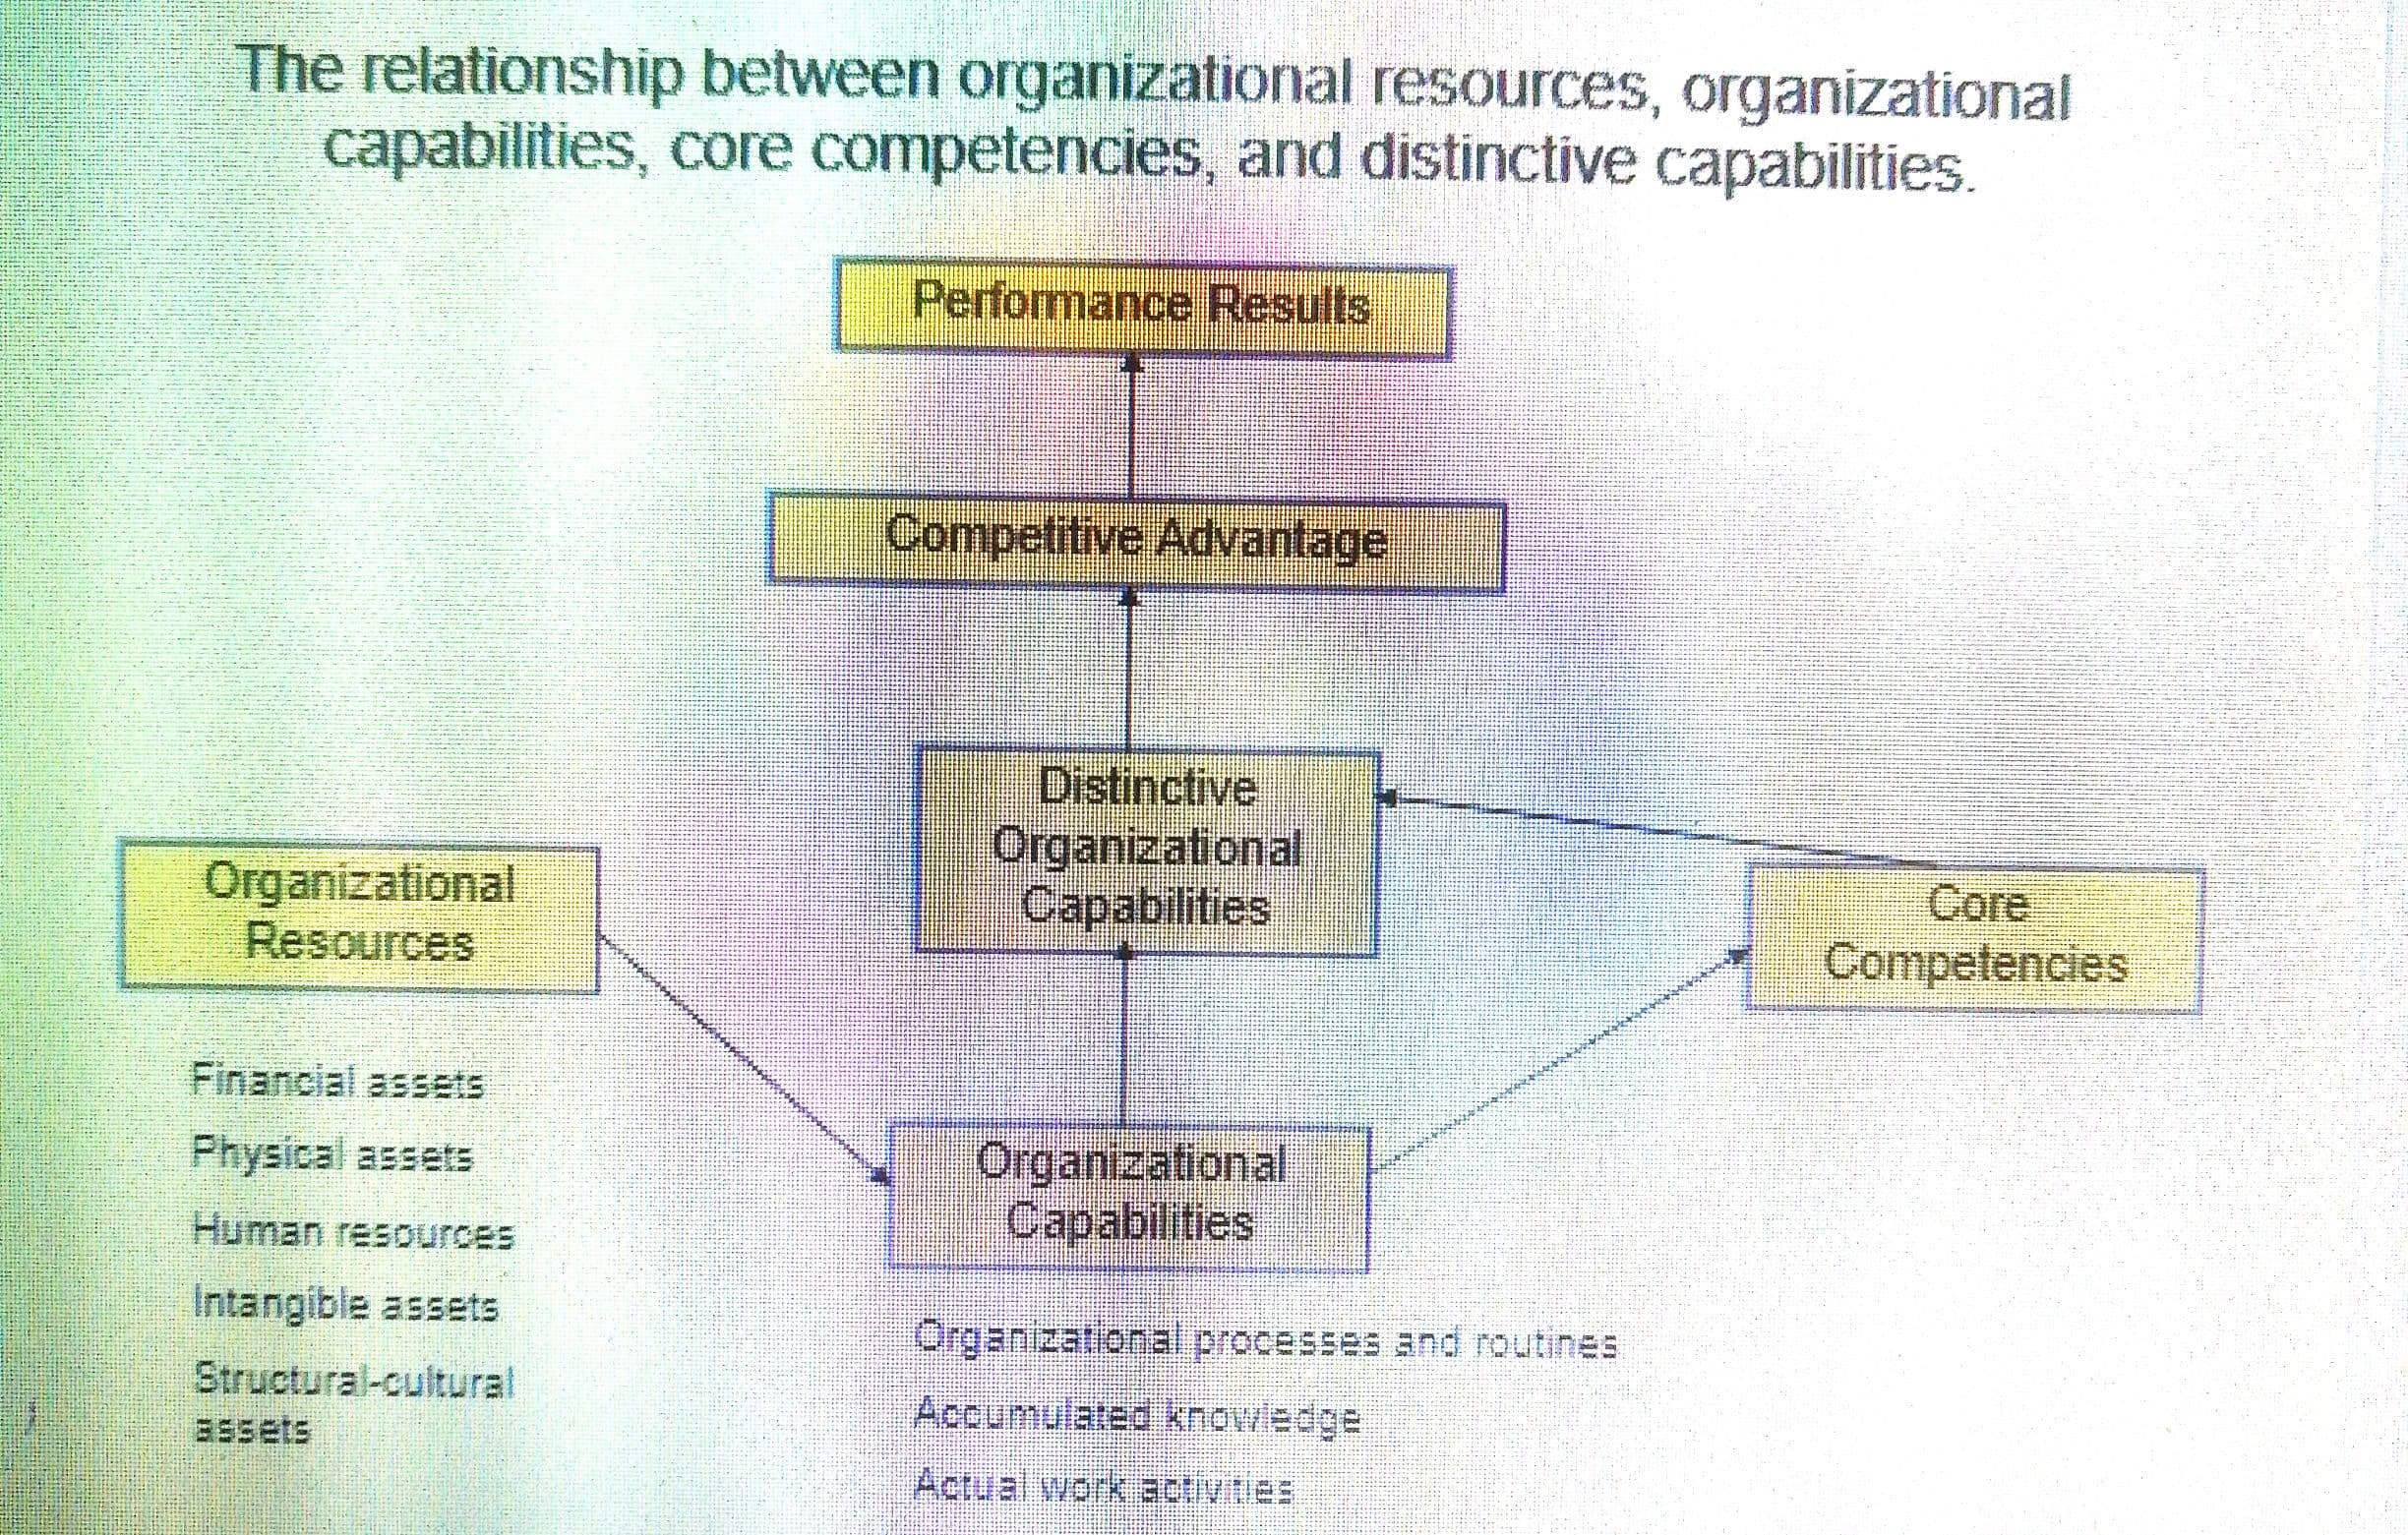 The relationship between organizational resources, organizational
capabilities, core competencies, and distinctive capabilities.
Organizational
Resources
Financial assets
Physical assets
Human resources
Intangible assets
Structural-cultural
assets
******
Performance Results
Competitive Advantage
Distinctive
Organizational
Capabilities
Organizational
Capabilities
Organizational processes and routines
Accumulated knowledge
Actual work activities
Competencies